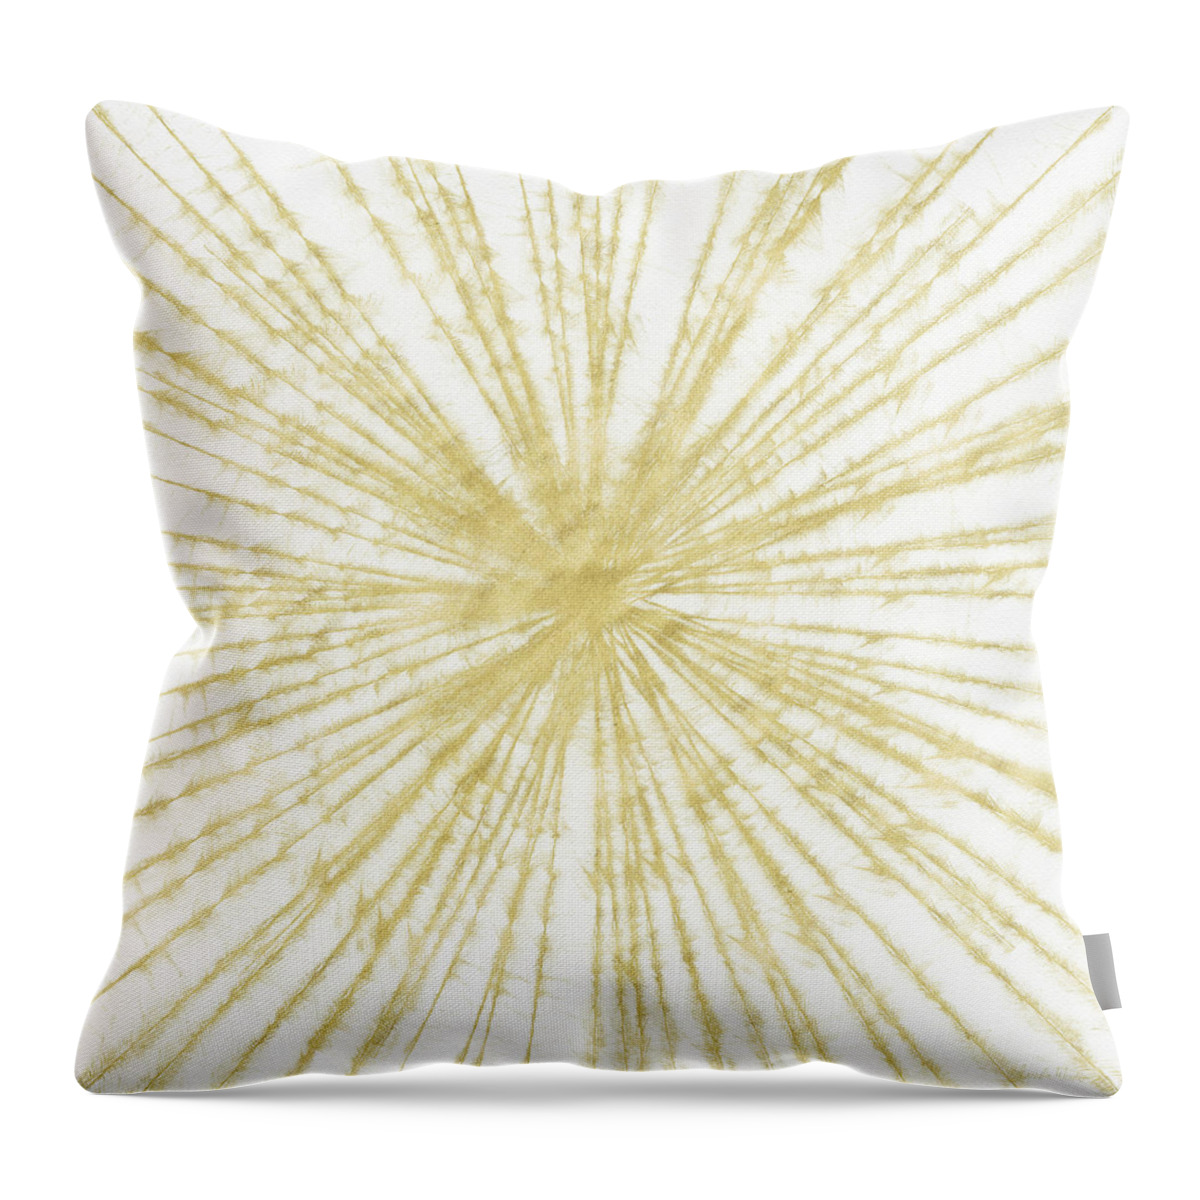 Gold Throw Pillow featuring the painting Spinning Gold- Art by Linda Woods by Linda Woods